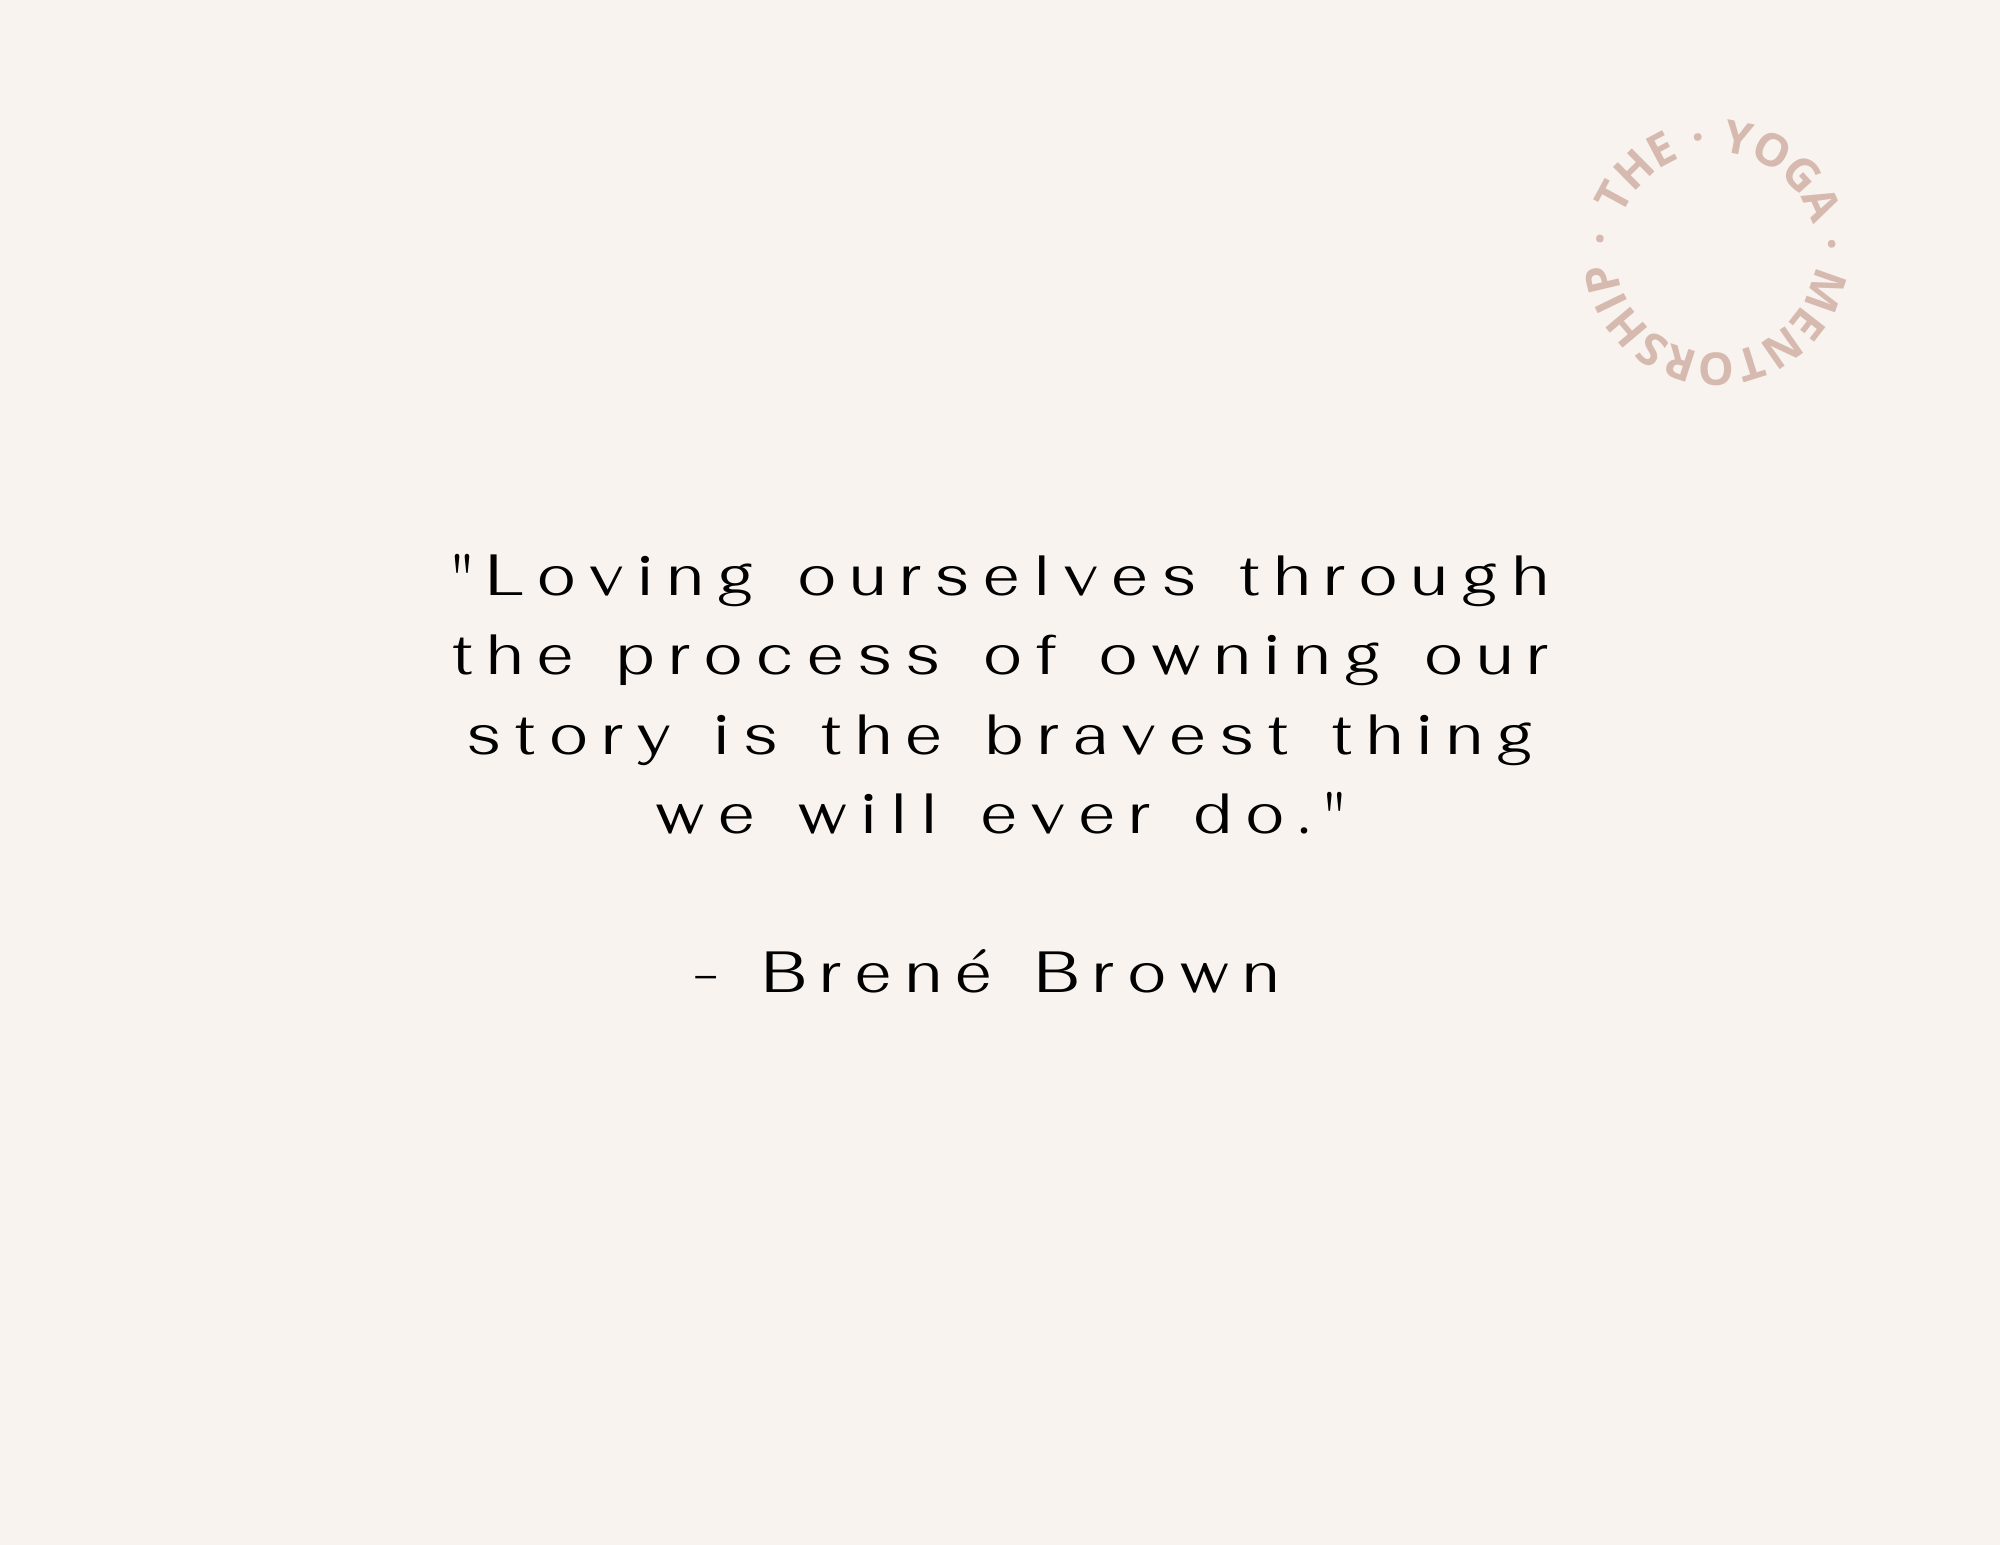 a quote from Brene Brown that reads "Loving ourselves through the process of owning our story is the bravest thing we will ever do. The Yoga Mentorship logo in the upper righthand corner.